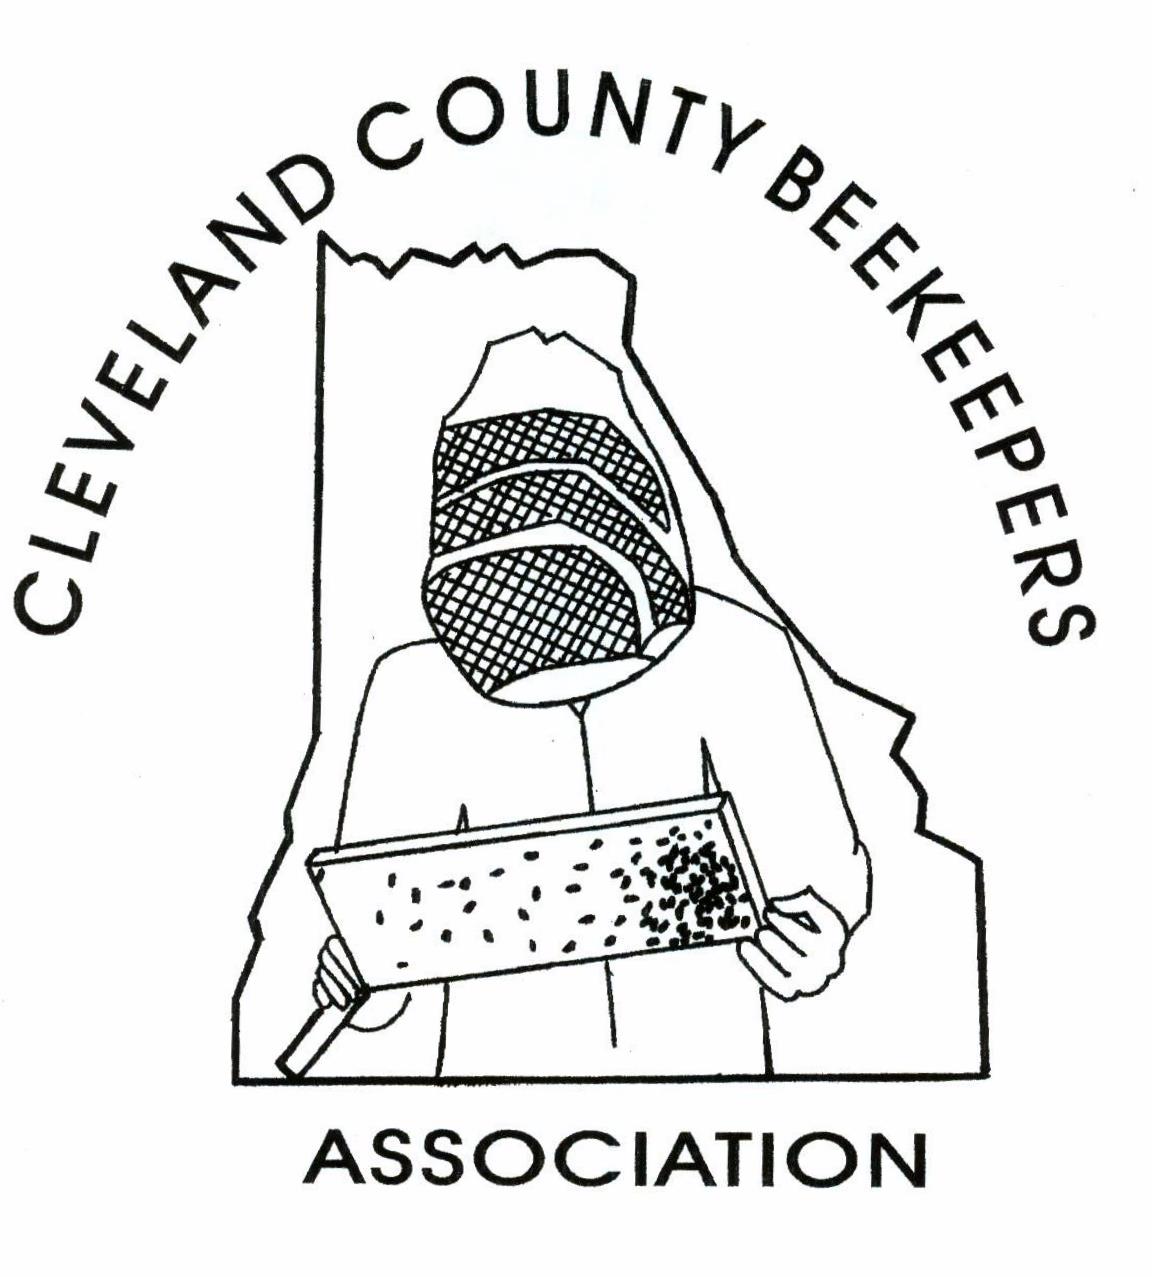 Cleveland County Beekeepers Association logo